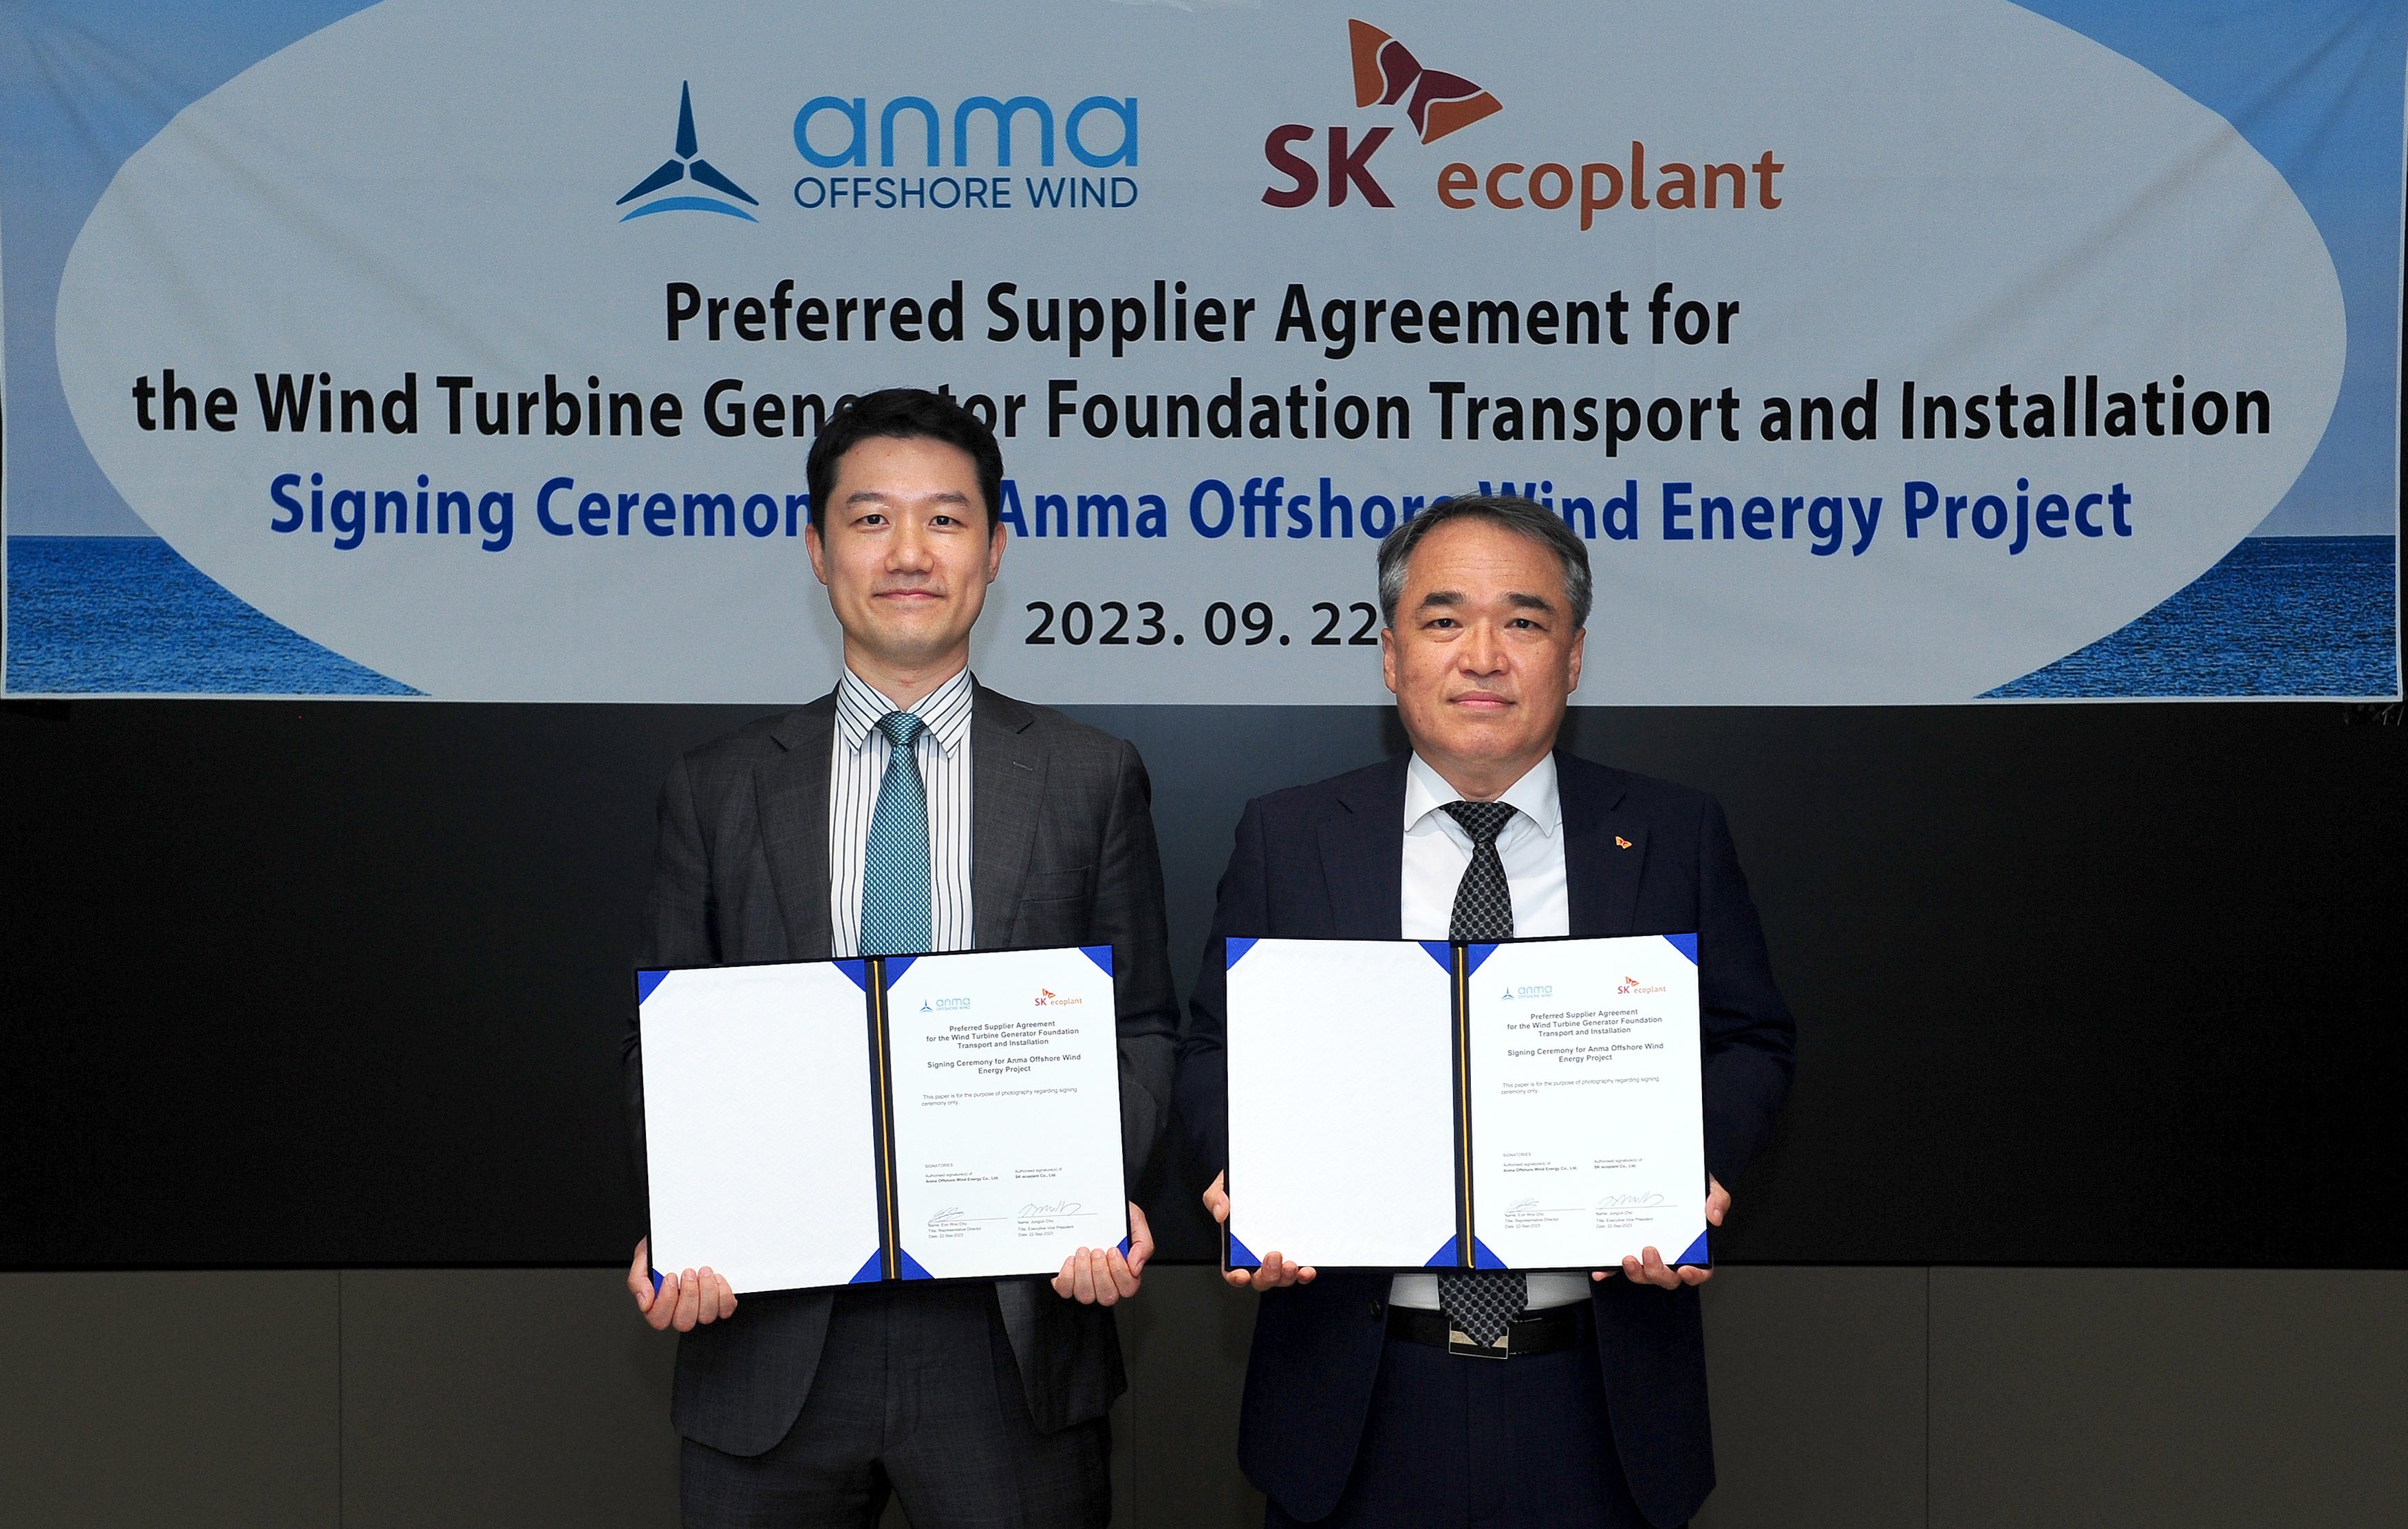 Anma Offshore Wind SK ecoplant